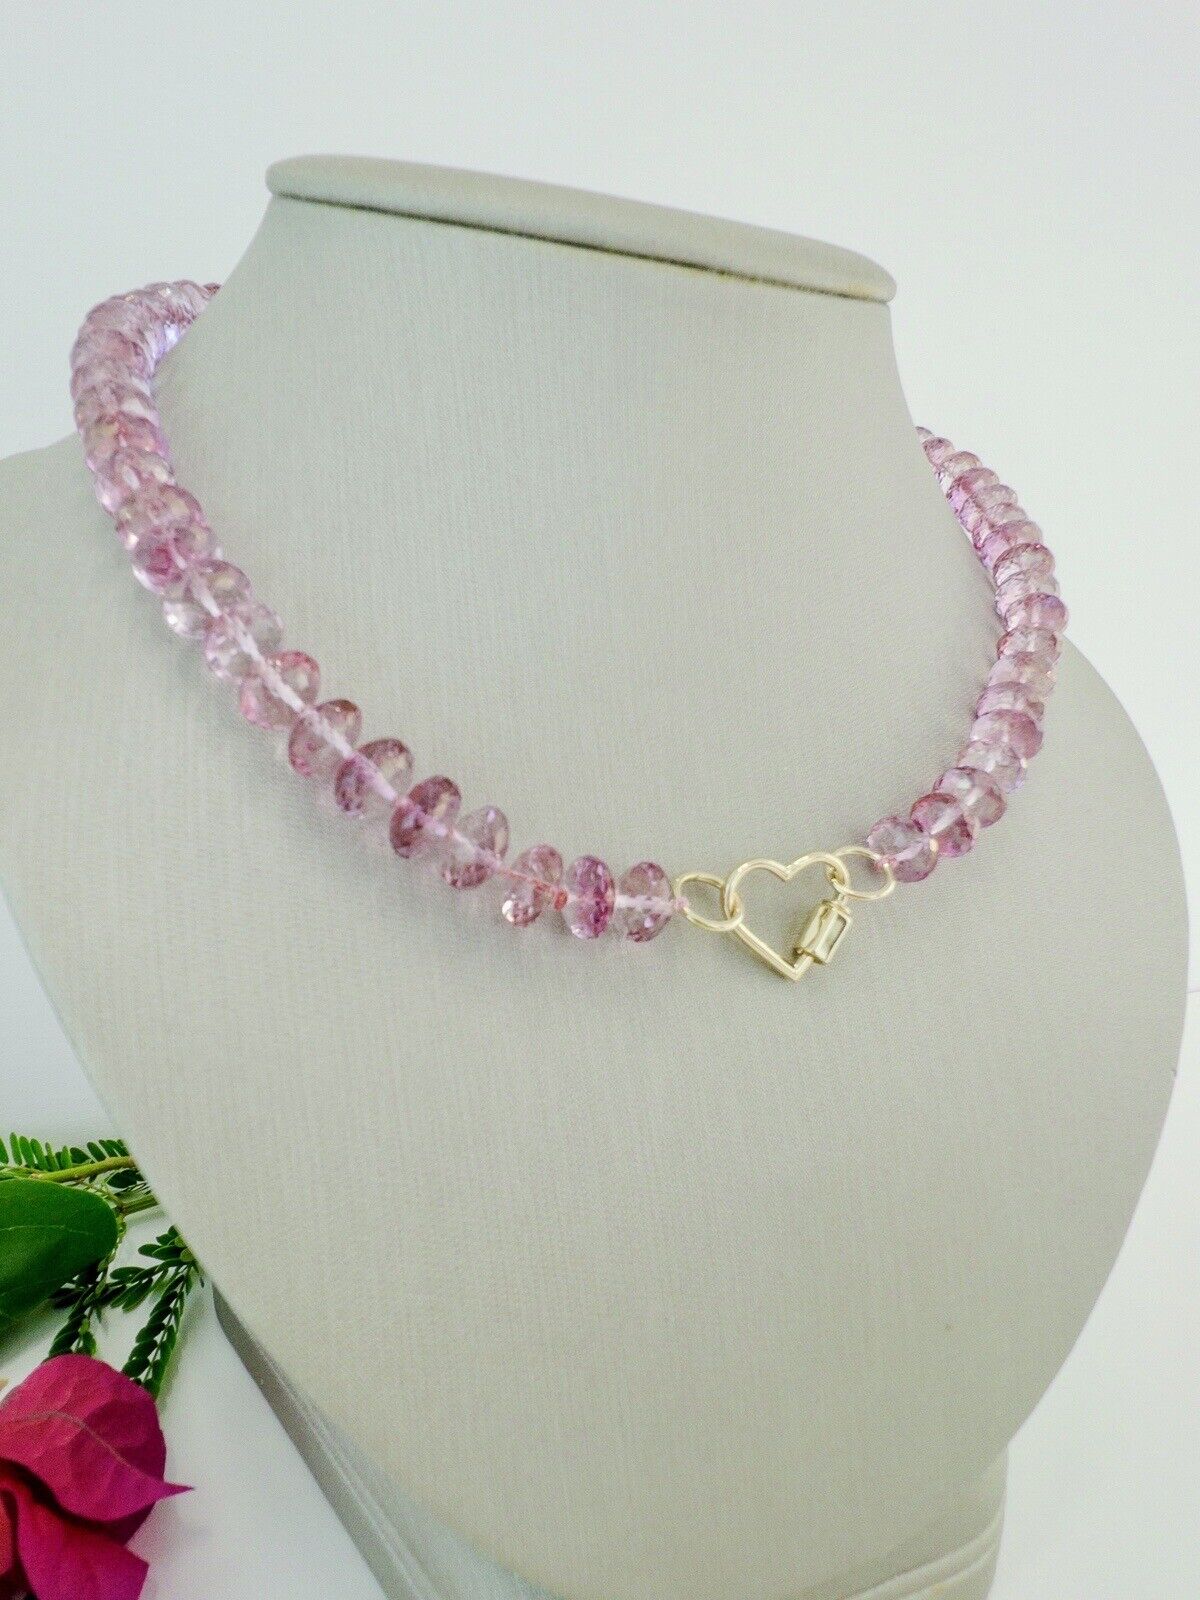 Solid 14k Yellow Gold Heart Clasp & Pink Topaz Necklace, New 17"